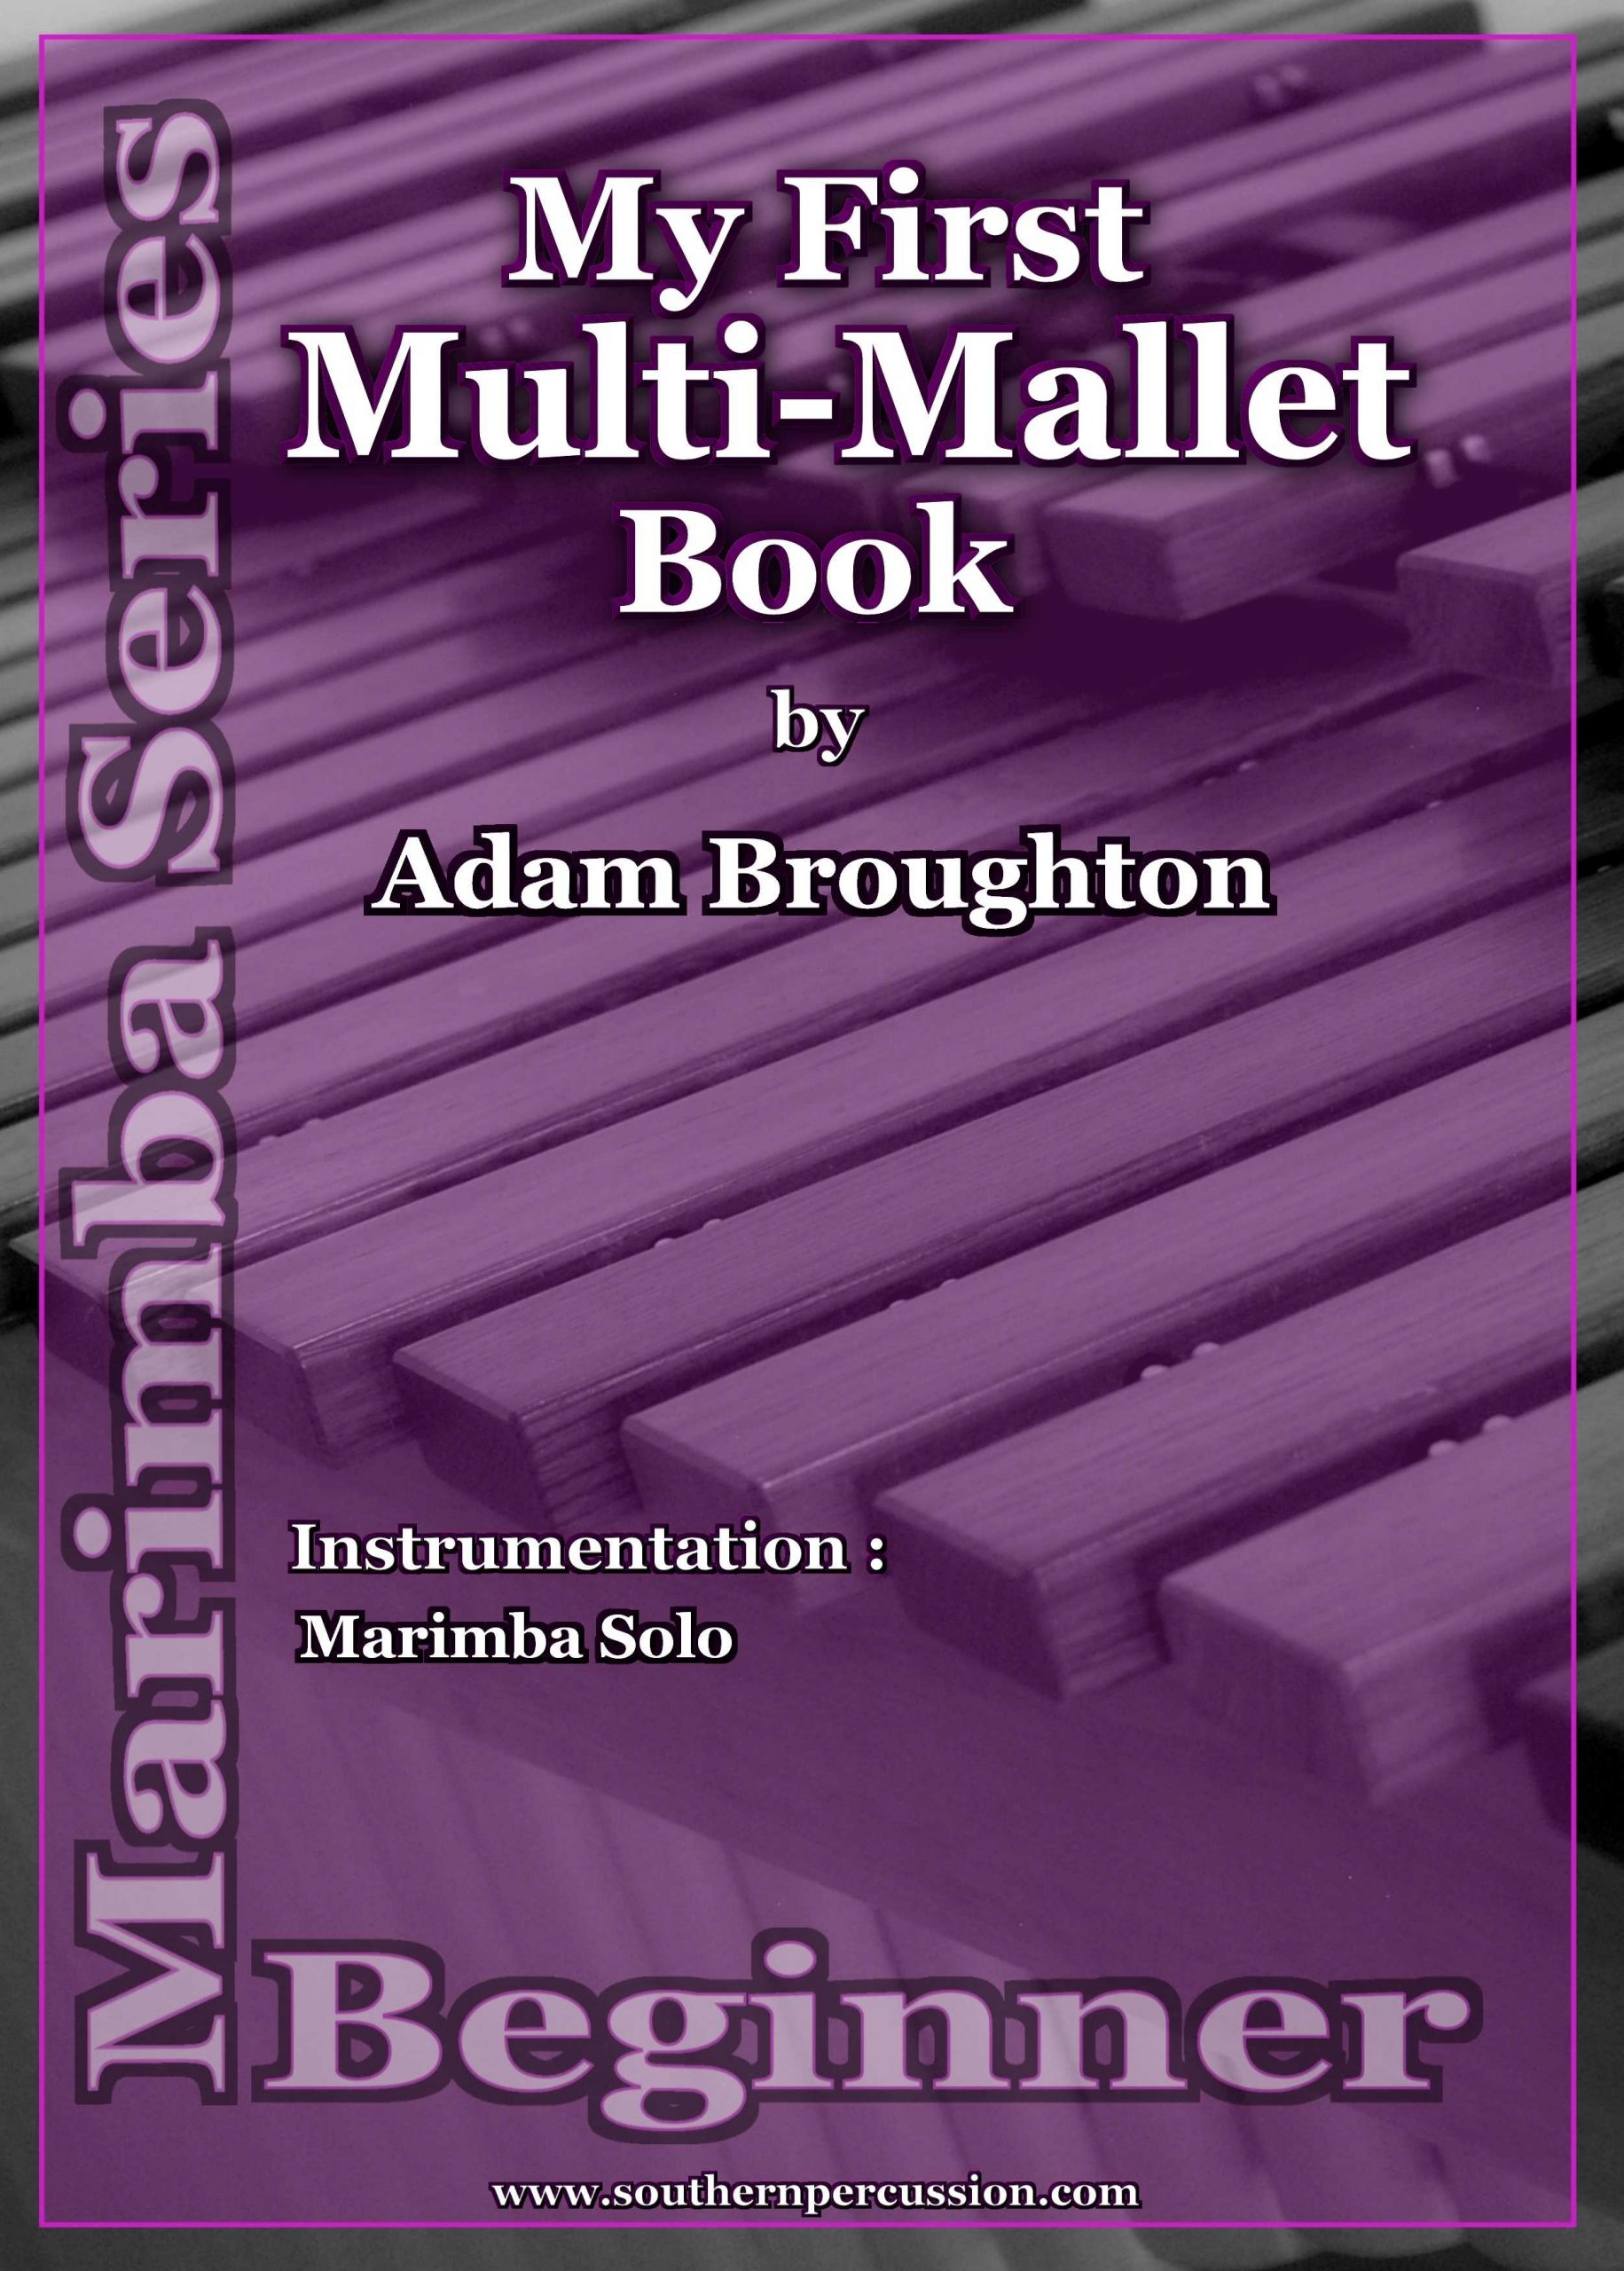 My First Multi-Mallet Book